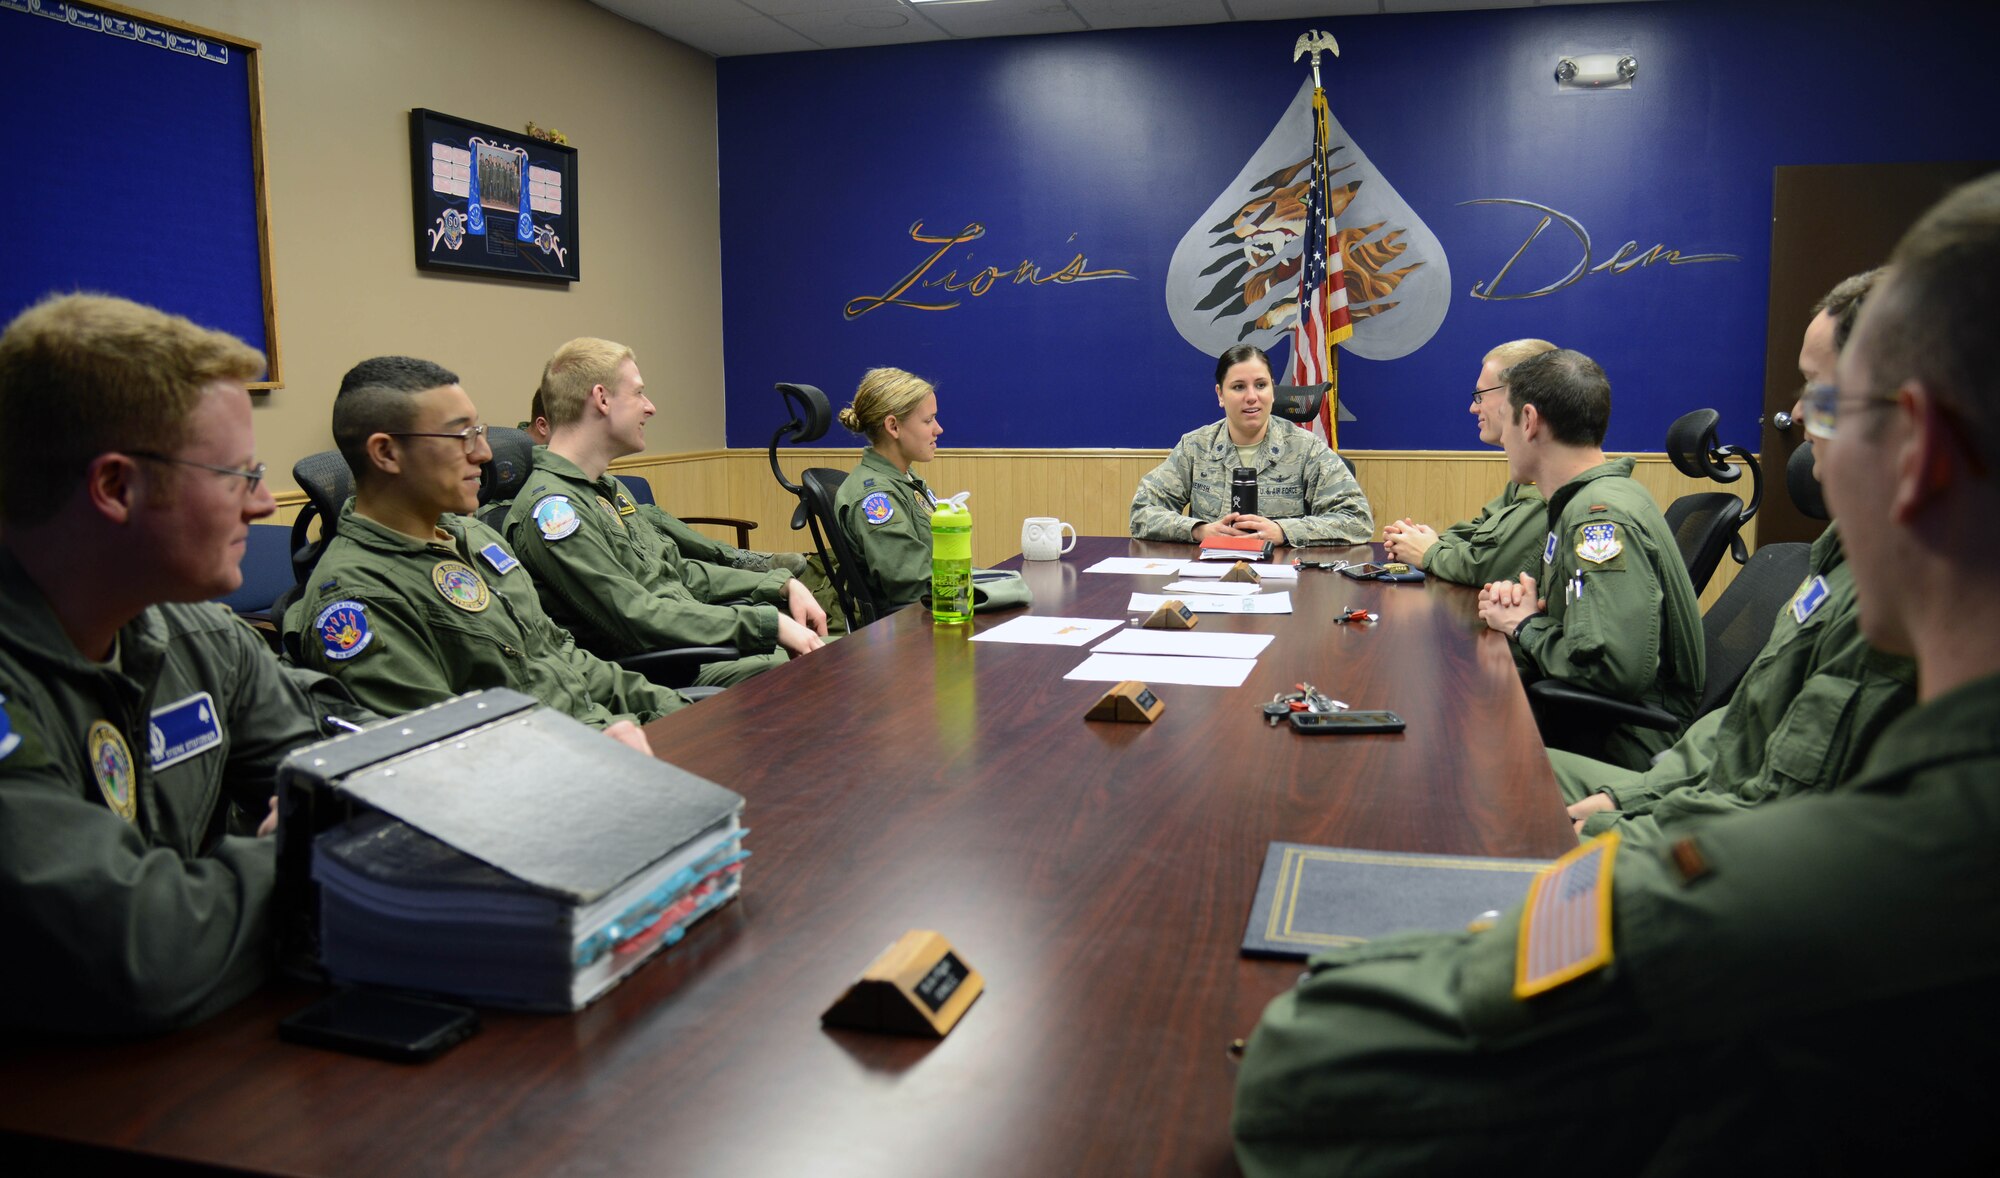 Members of the 10th Missile Squadron meet prior to dispatching to the missile field March 16, 2015, at Malmstrom Air Force Base, Mont. Before each dispatch, missileers meet with each other to discuss any pressing matters. (U.S. Air Force photo/ Airman 1st Class Dillon Johnston)